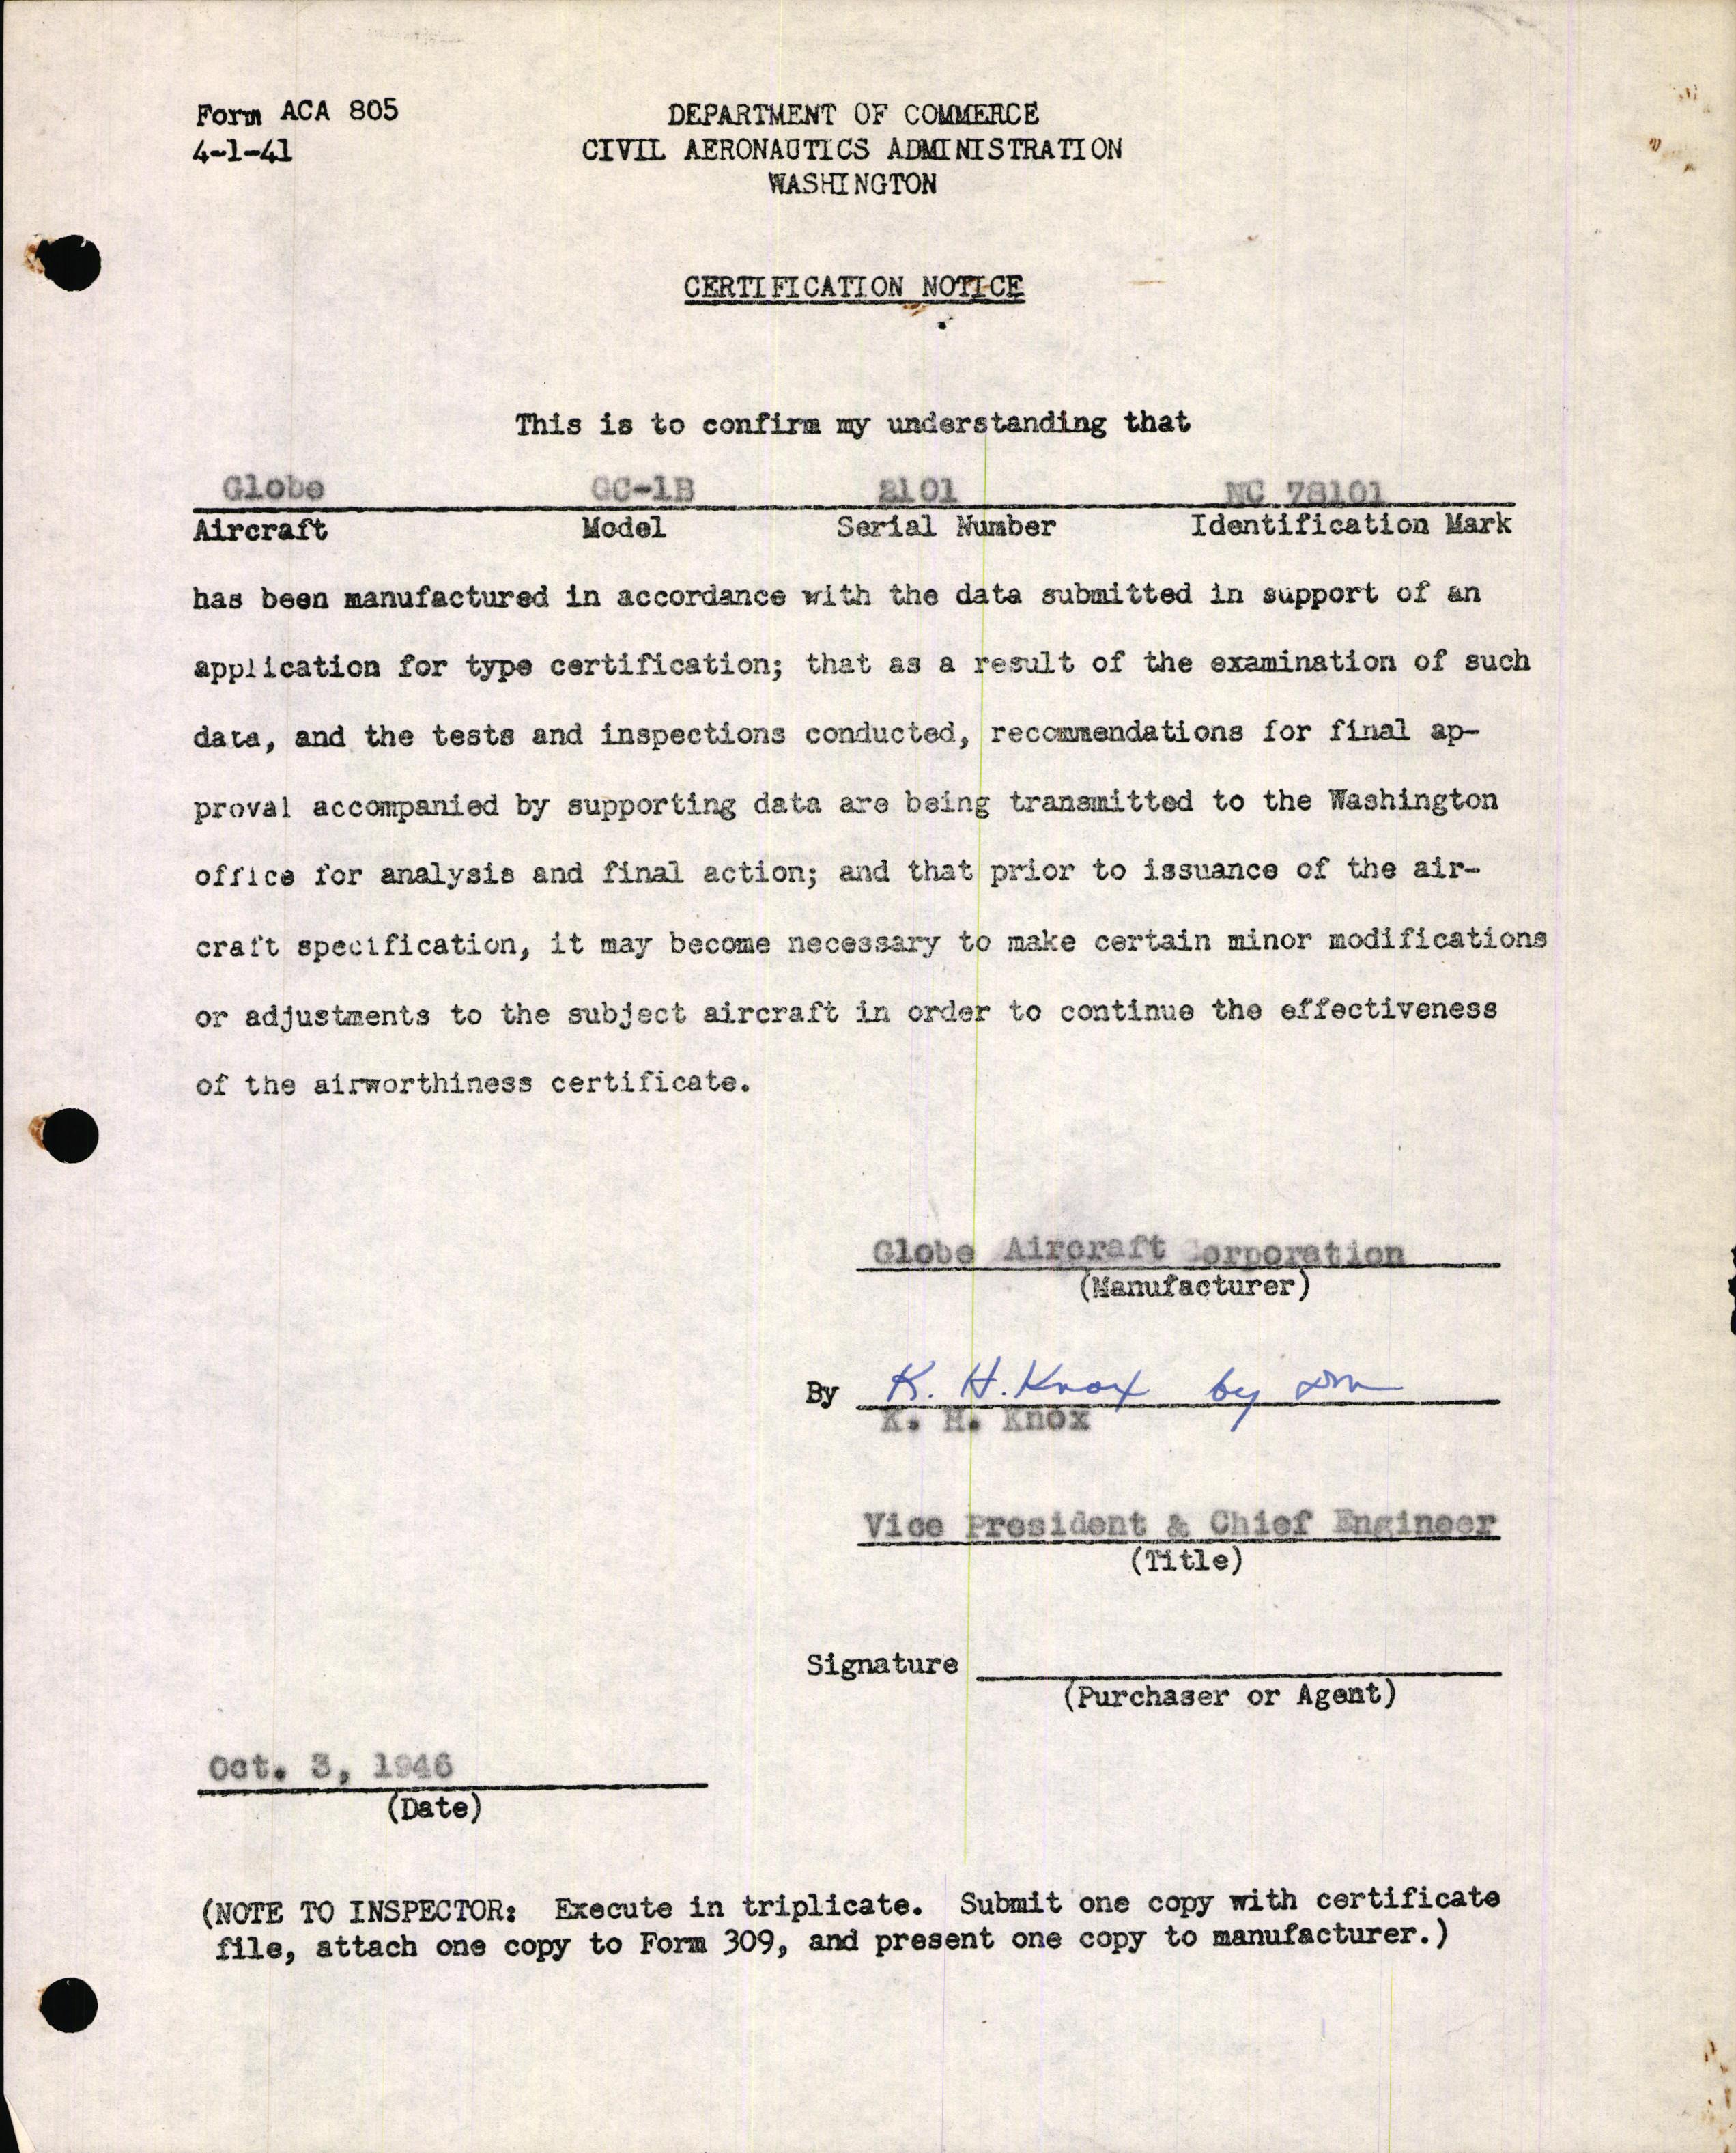 Sample page 1 from AirCorps Library document: Technical Information for Serial Number 2101